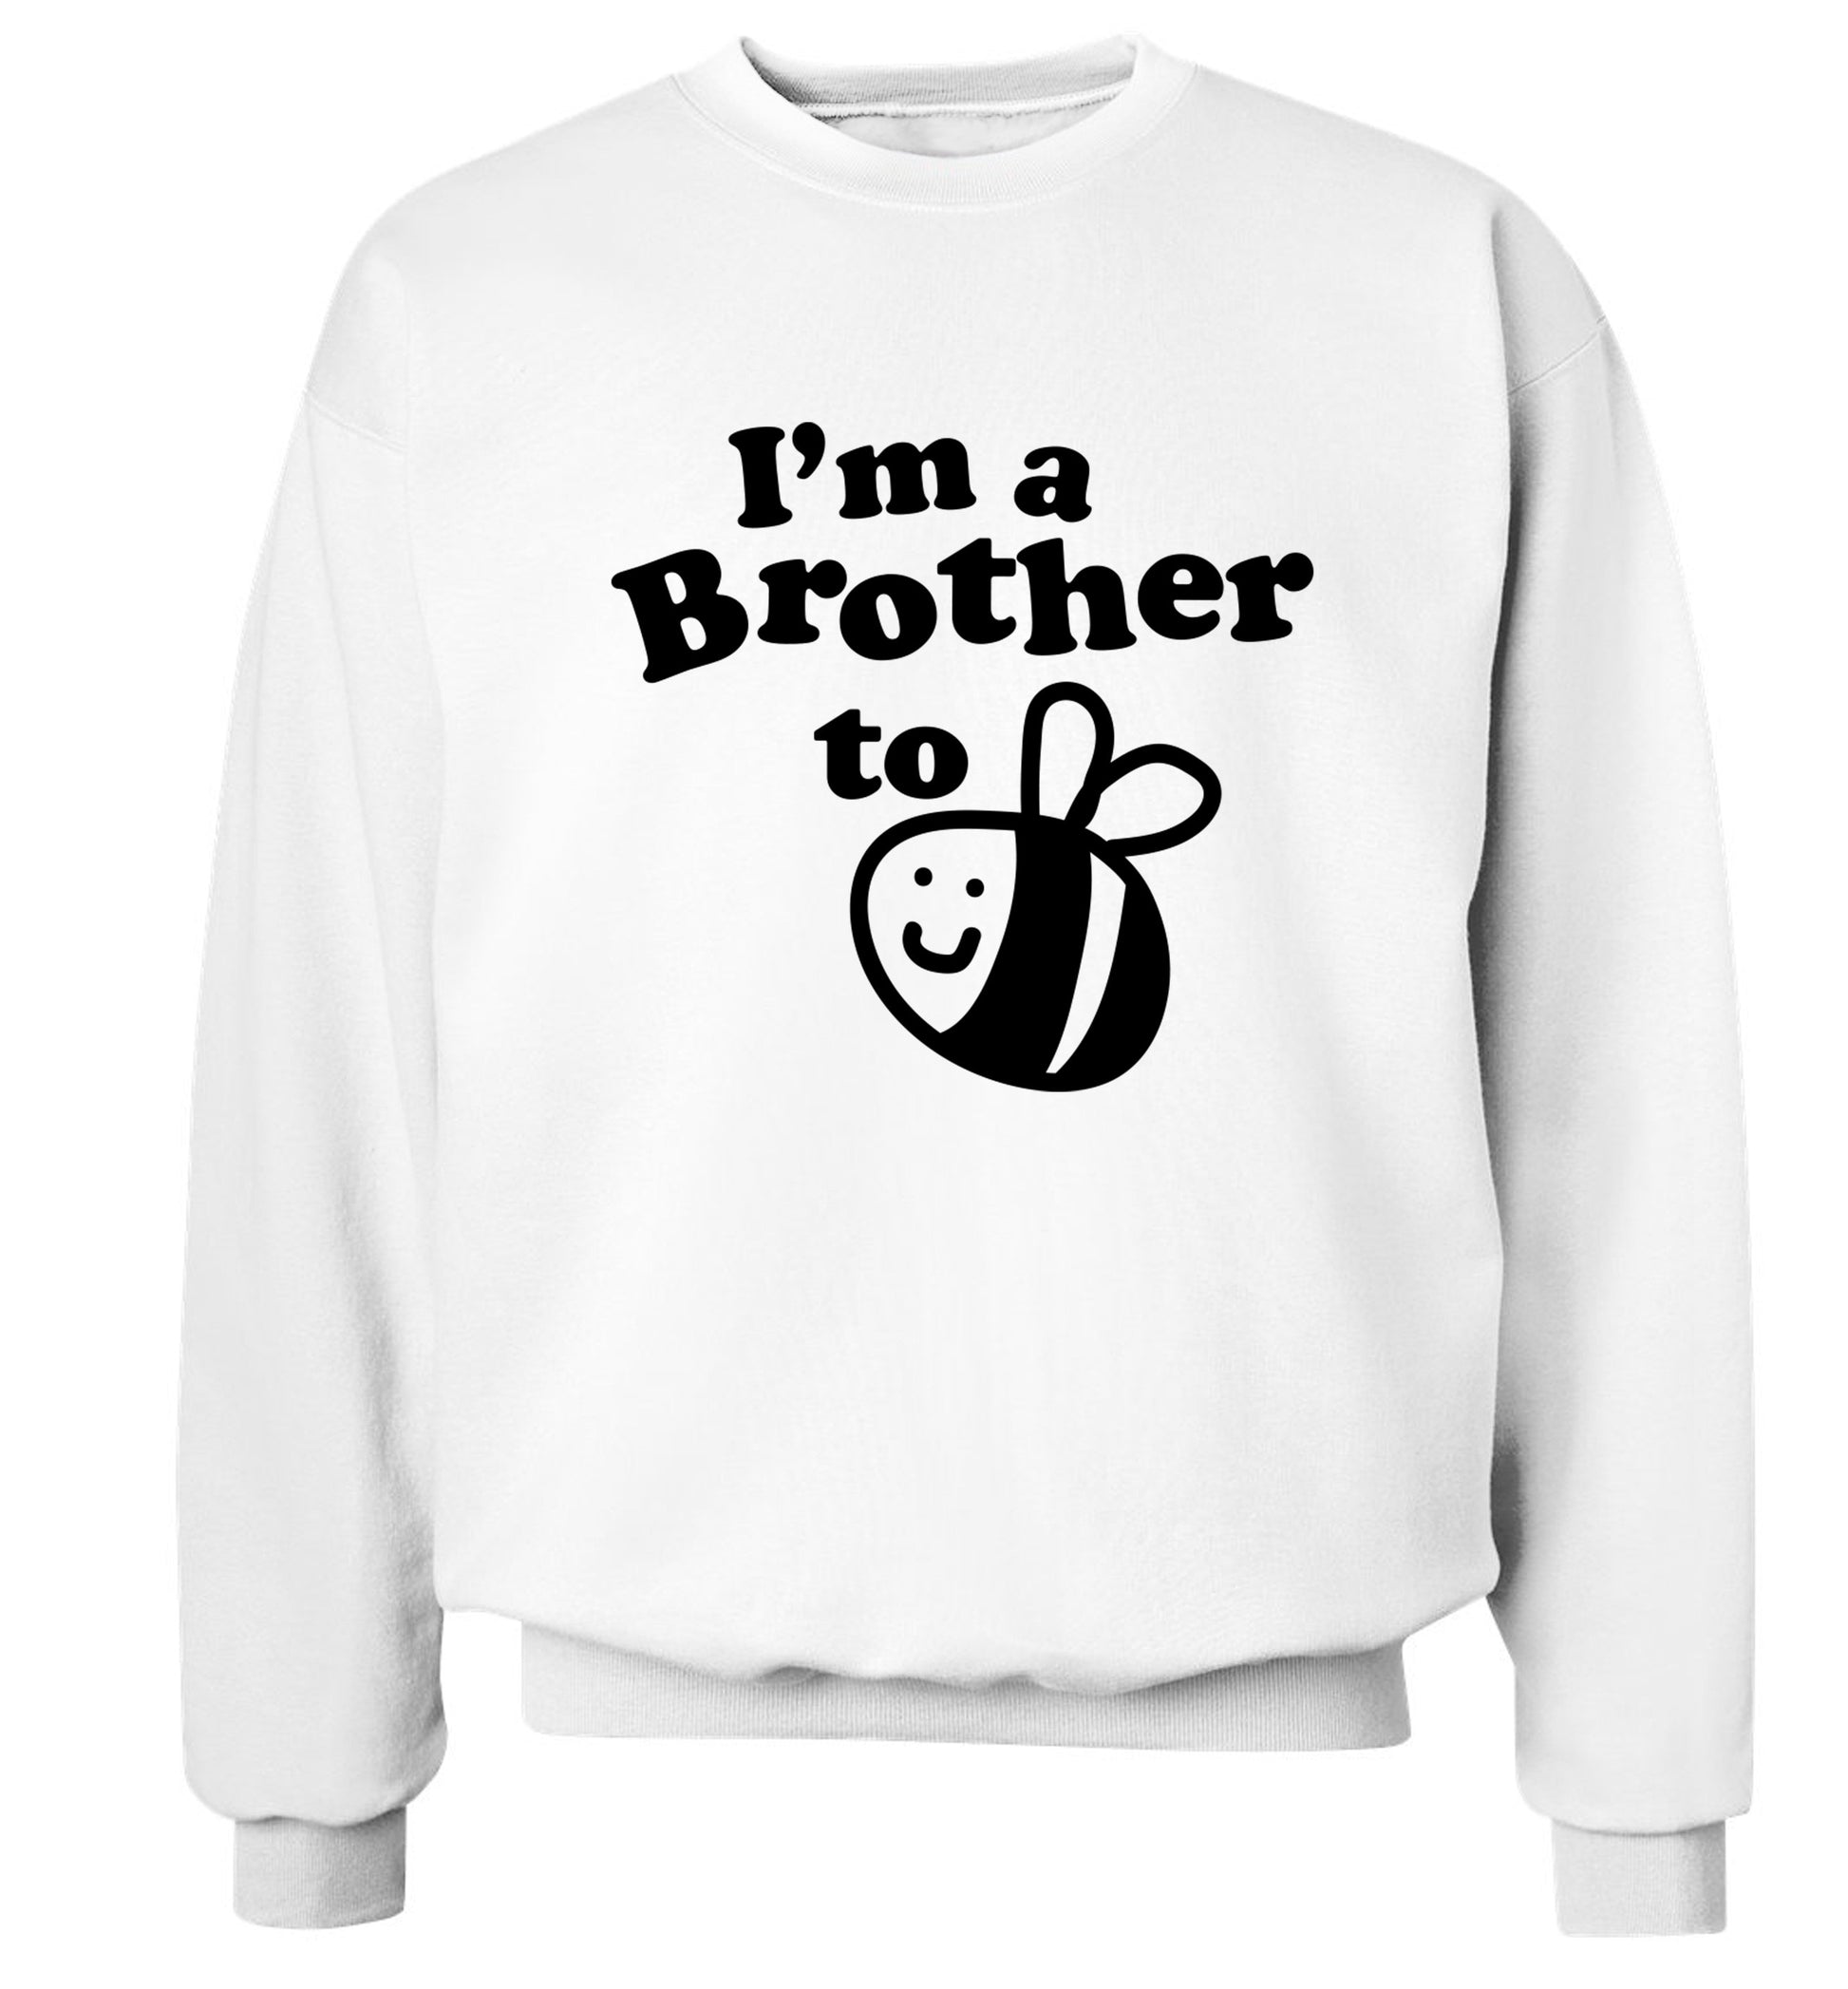 I'm a brother to be Adult's unisex white Sweater 2XL